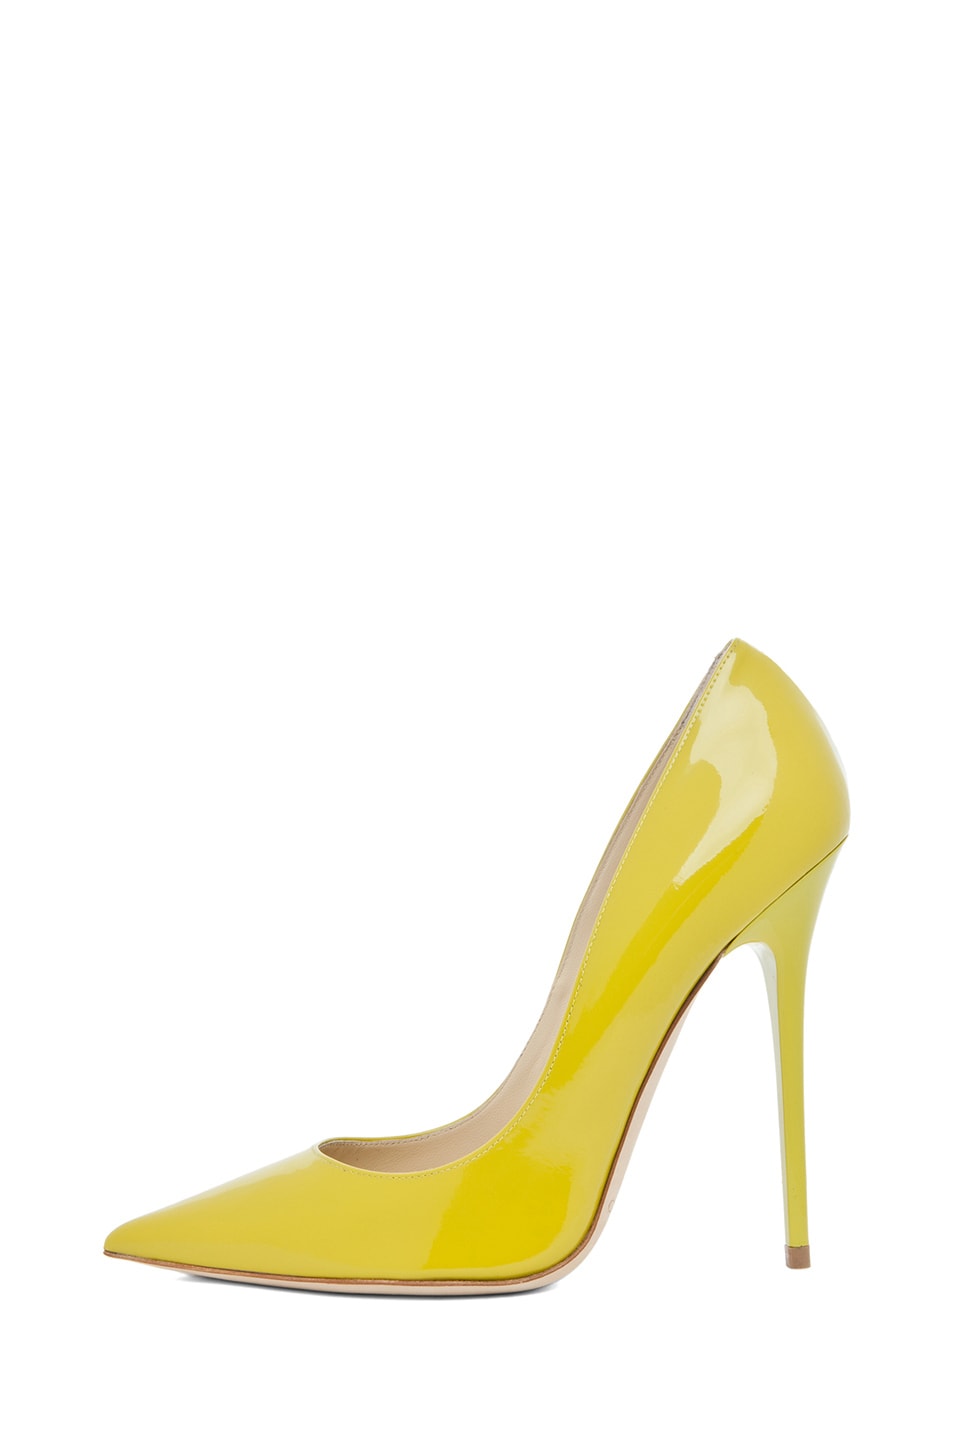 Image 1 of Jimmy Choo Anouk Pump in Citrine